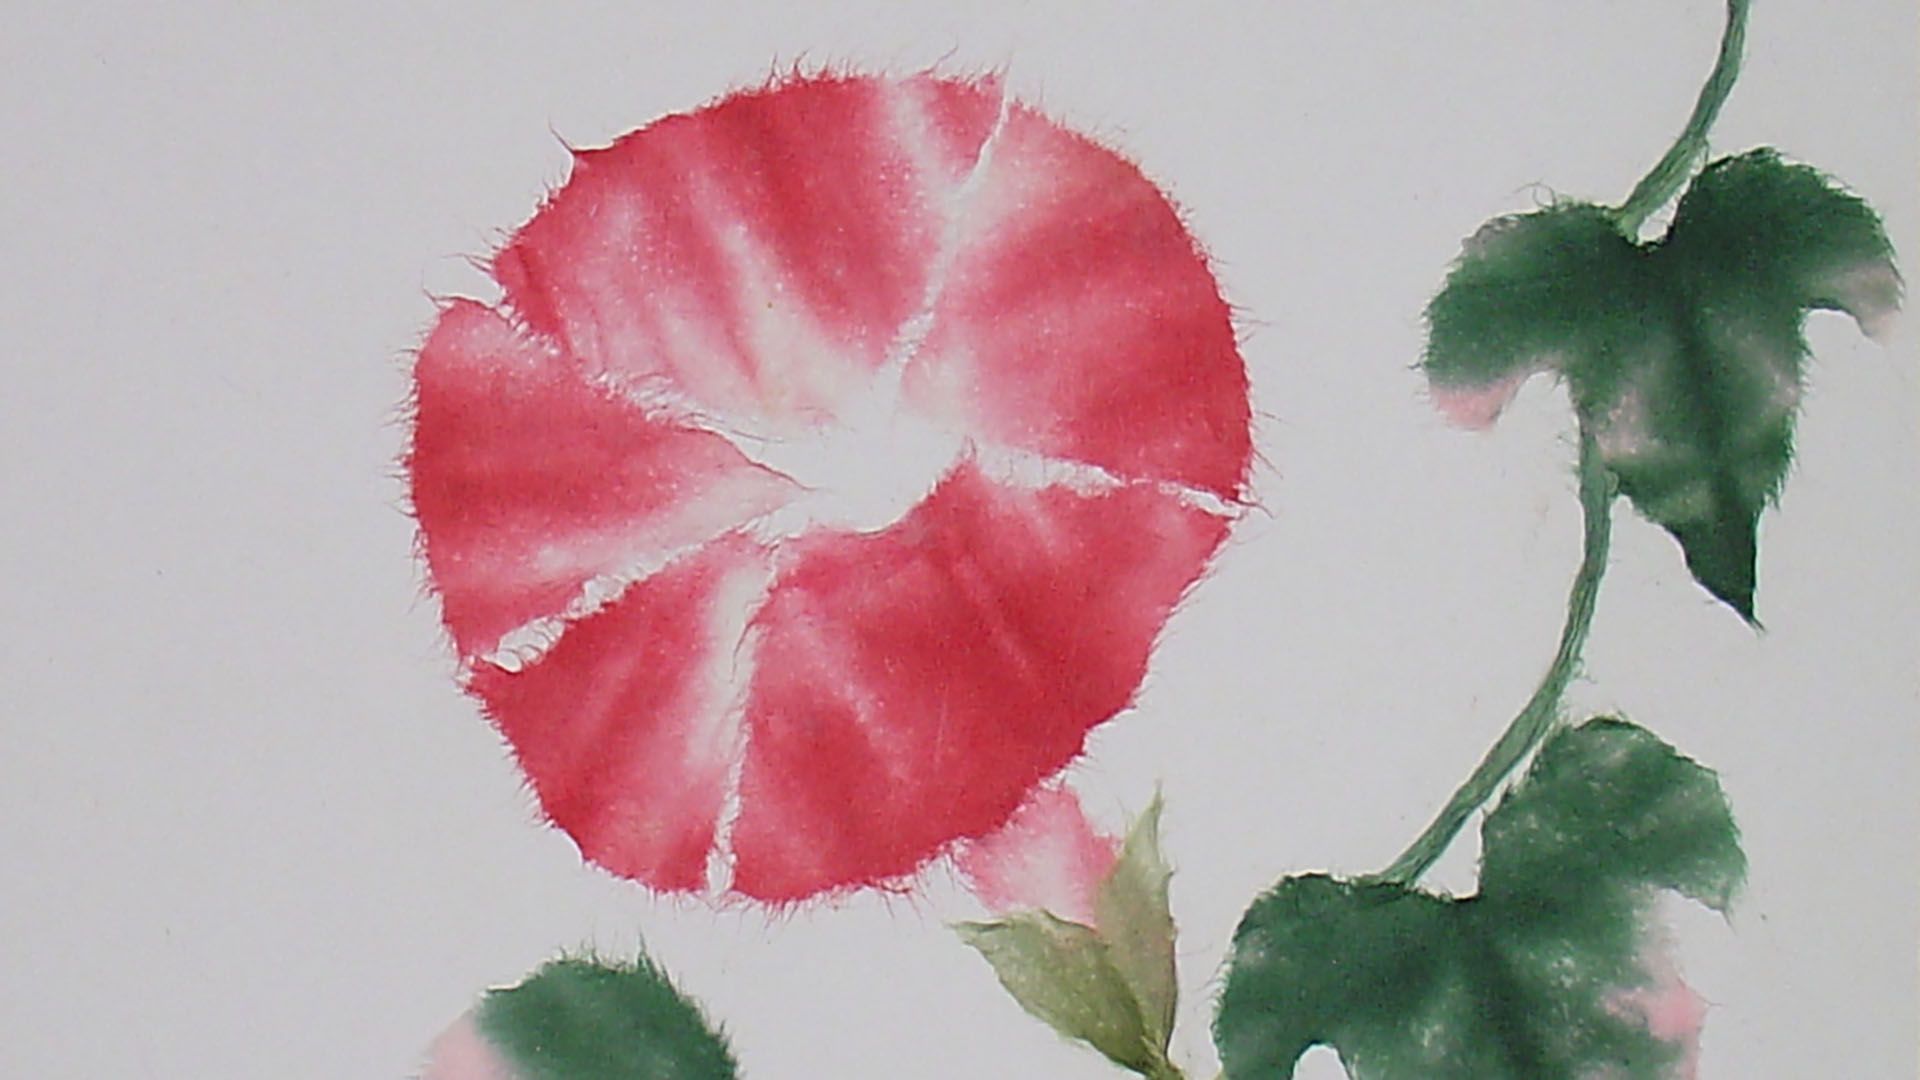 chigiri art piece of a large red flower and a green vine on white paper